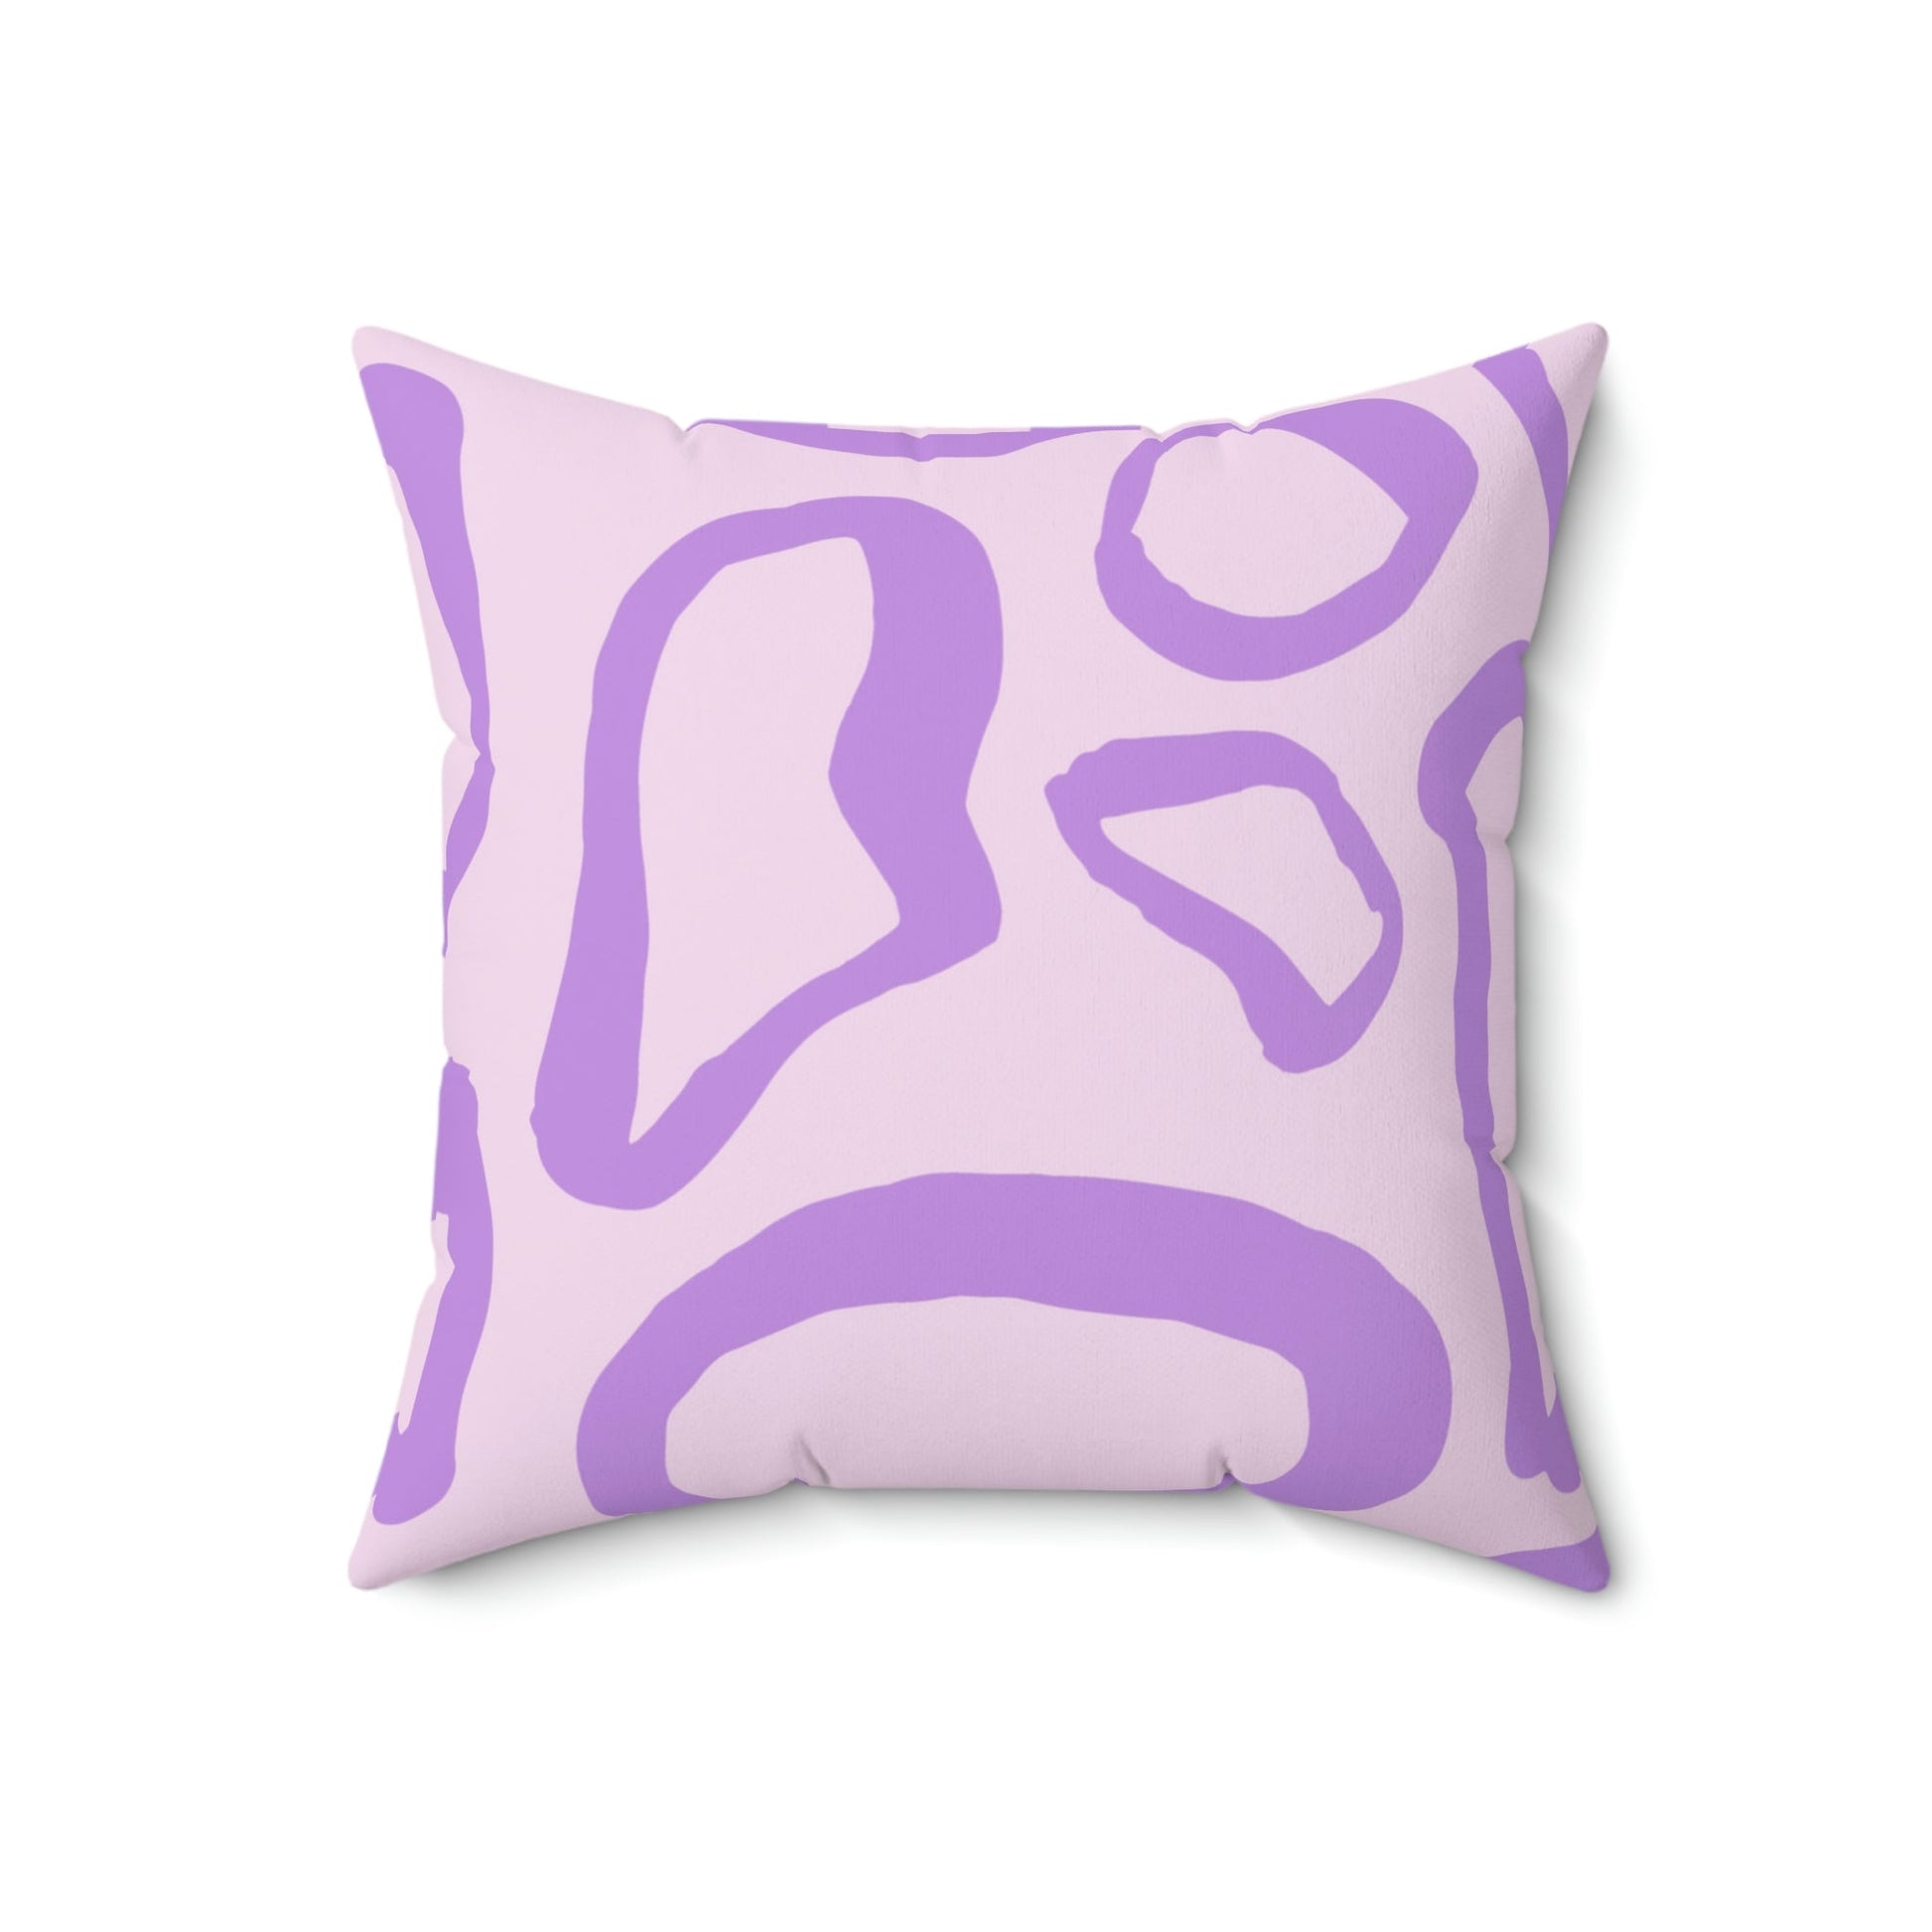 Abstract Lavender Shapes Square Pillow Home Decor Pink Sweetheart